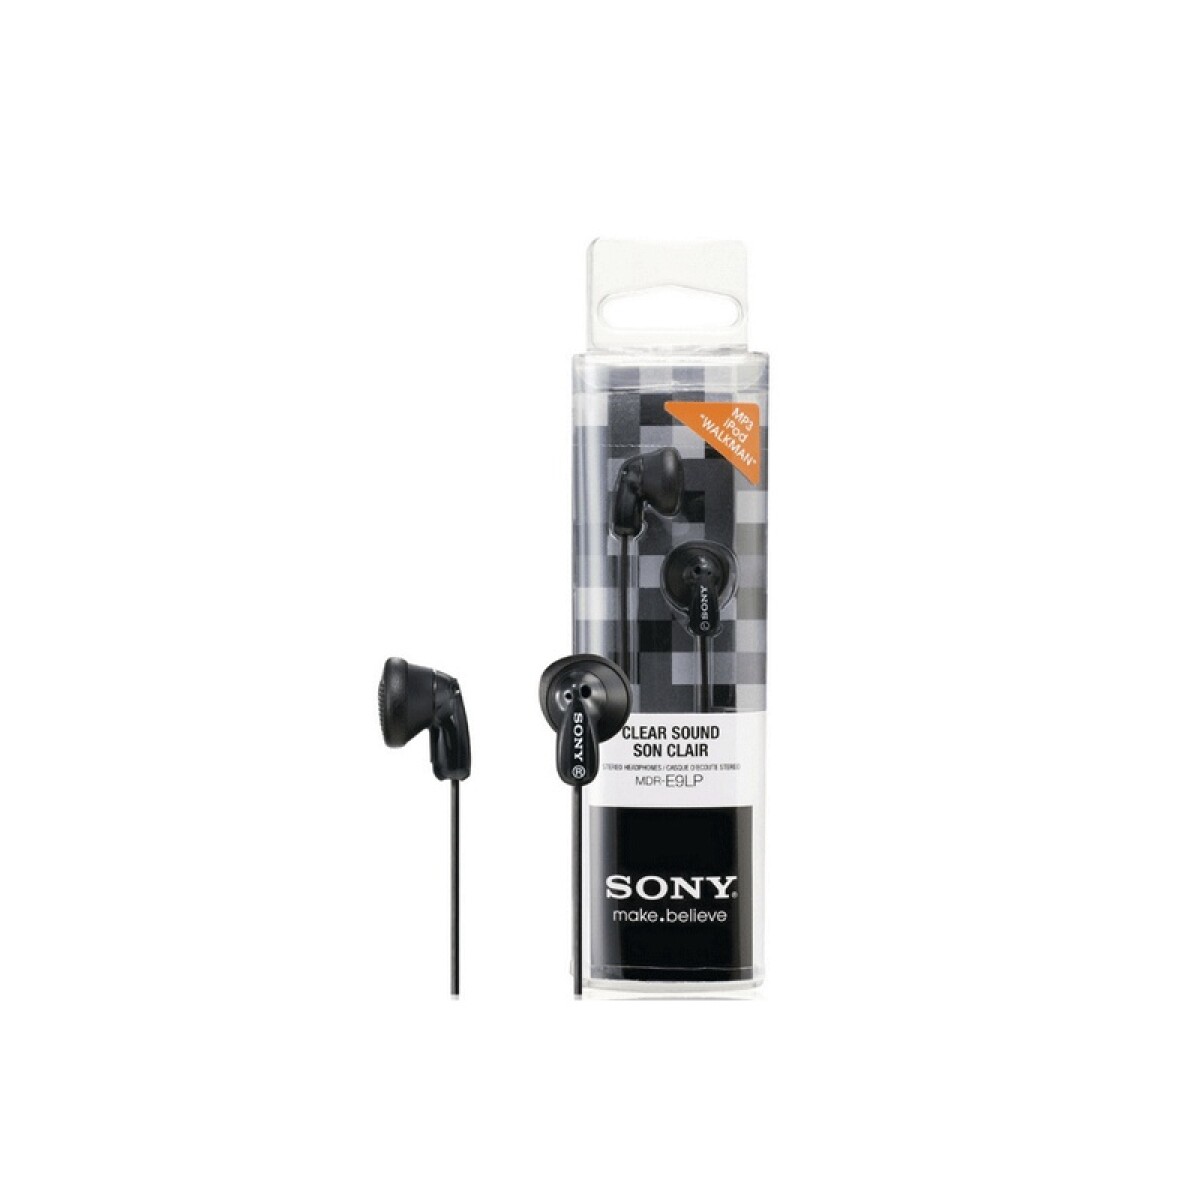 Auriculares con cable Sony MDR-E9LP